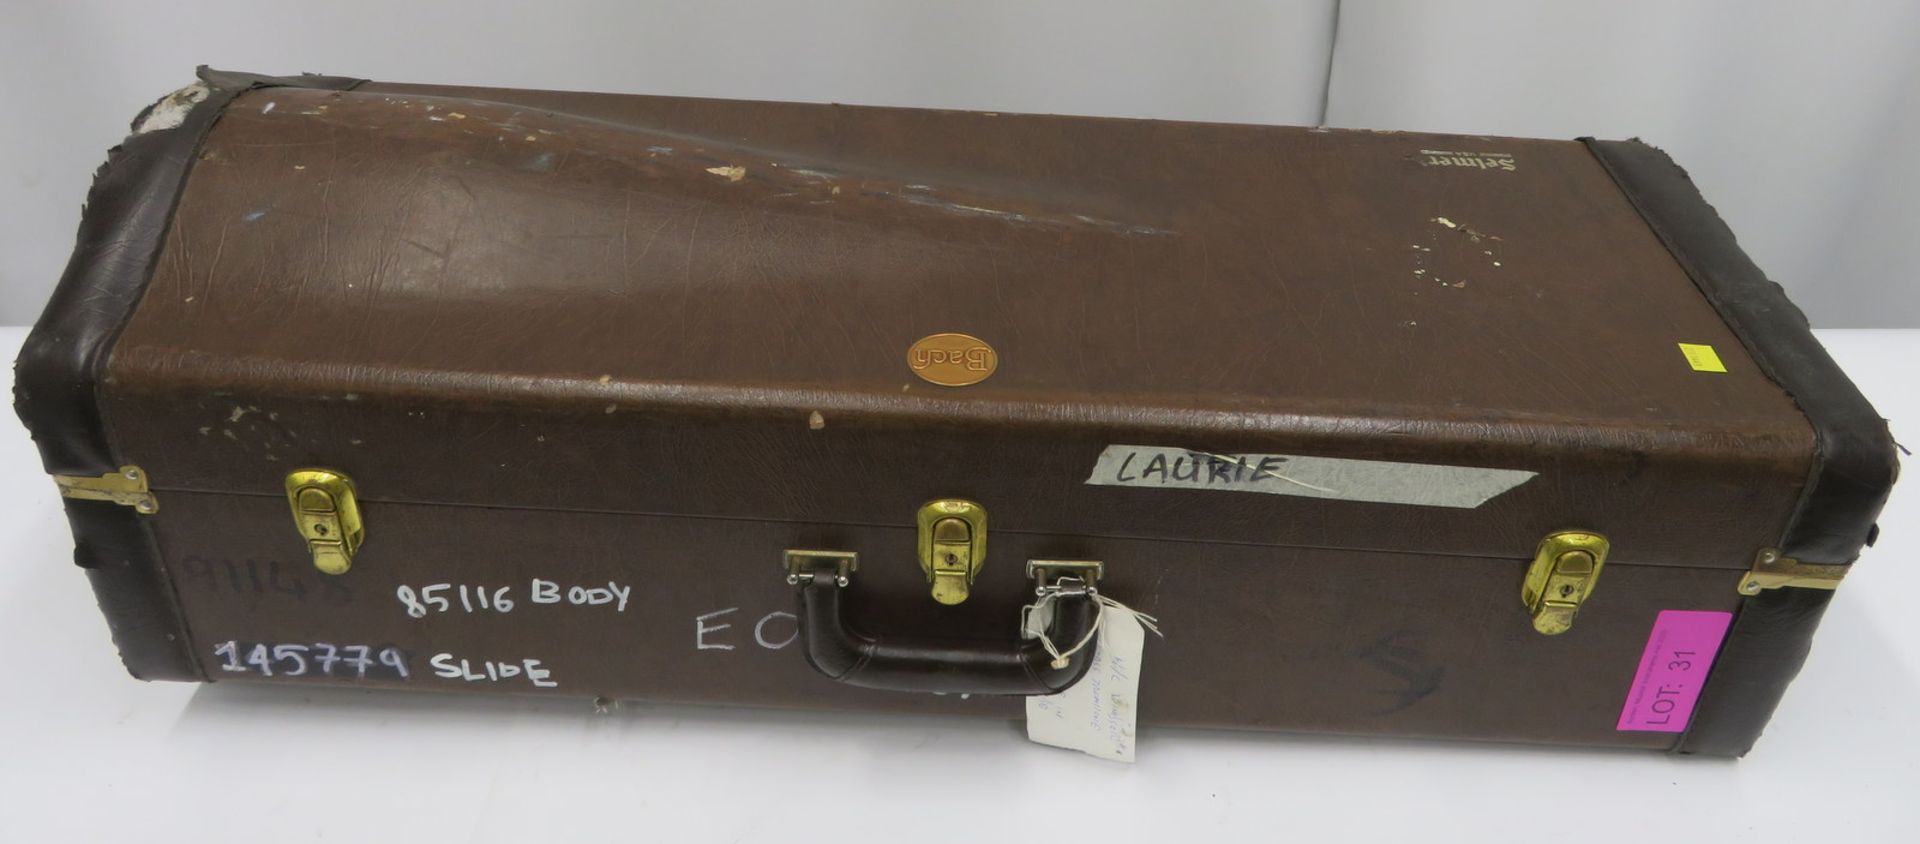 Bach Stradivarius model 50B bass trombone with case. Serial number: 85116. - Image 17 of 17